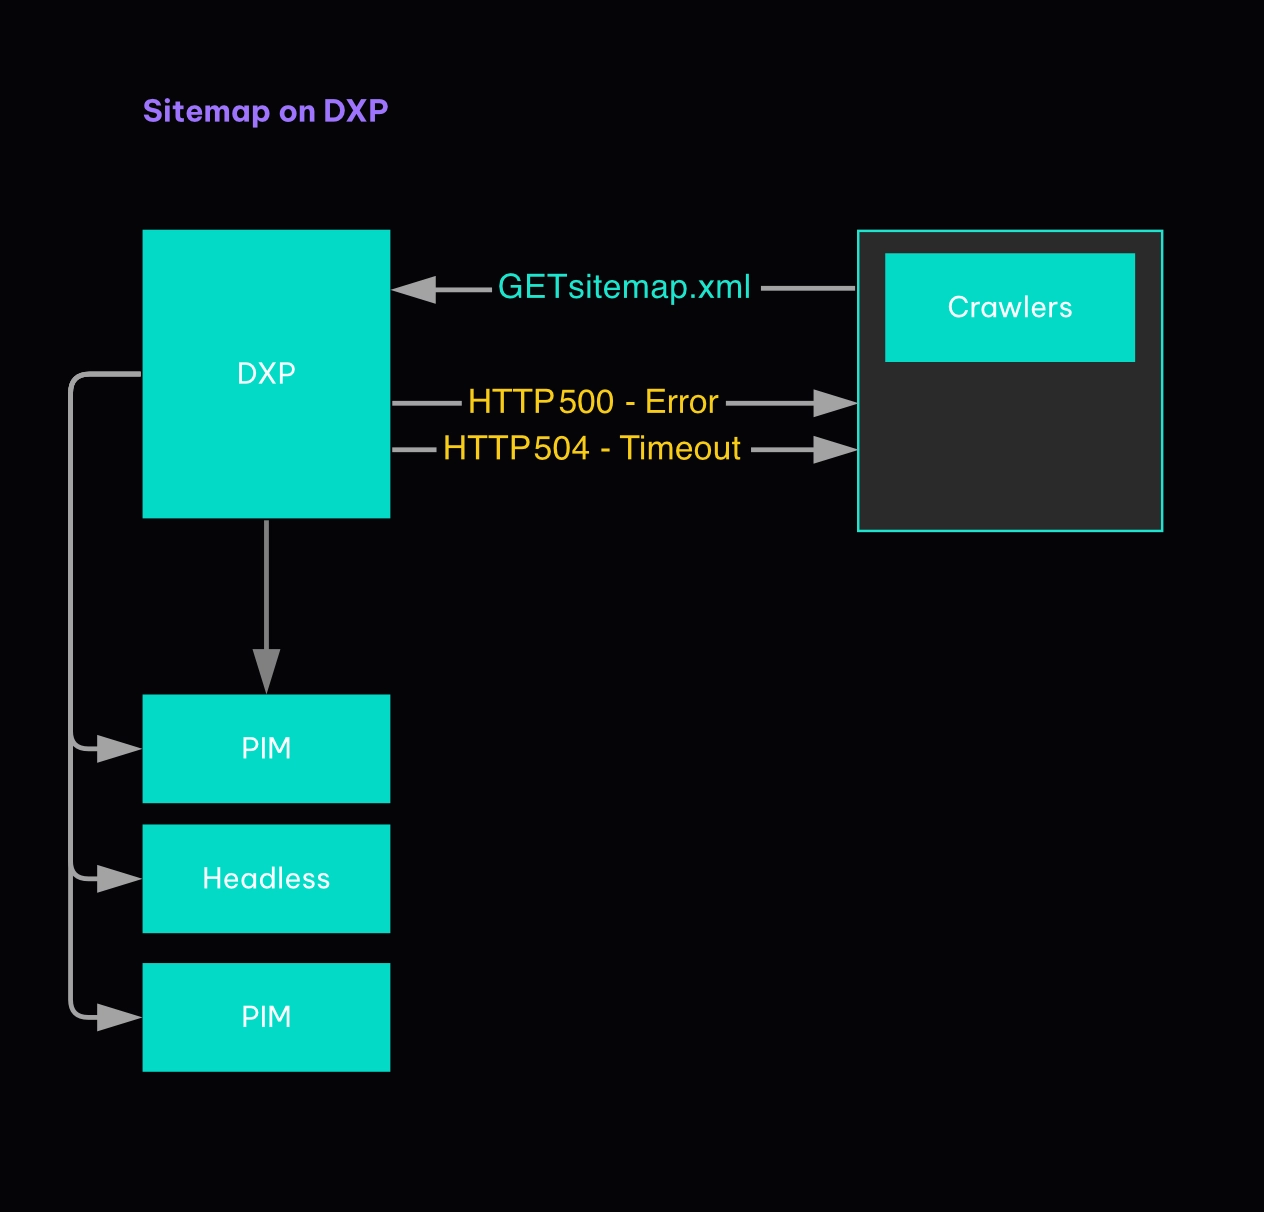 Diagram describing how sitemap is generated on DXP